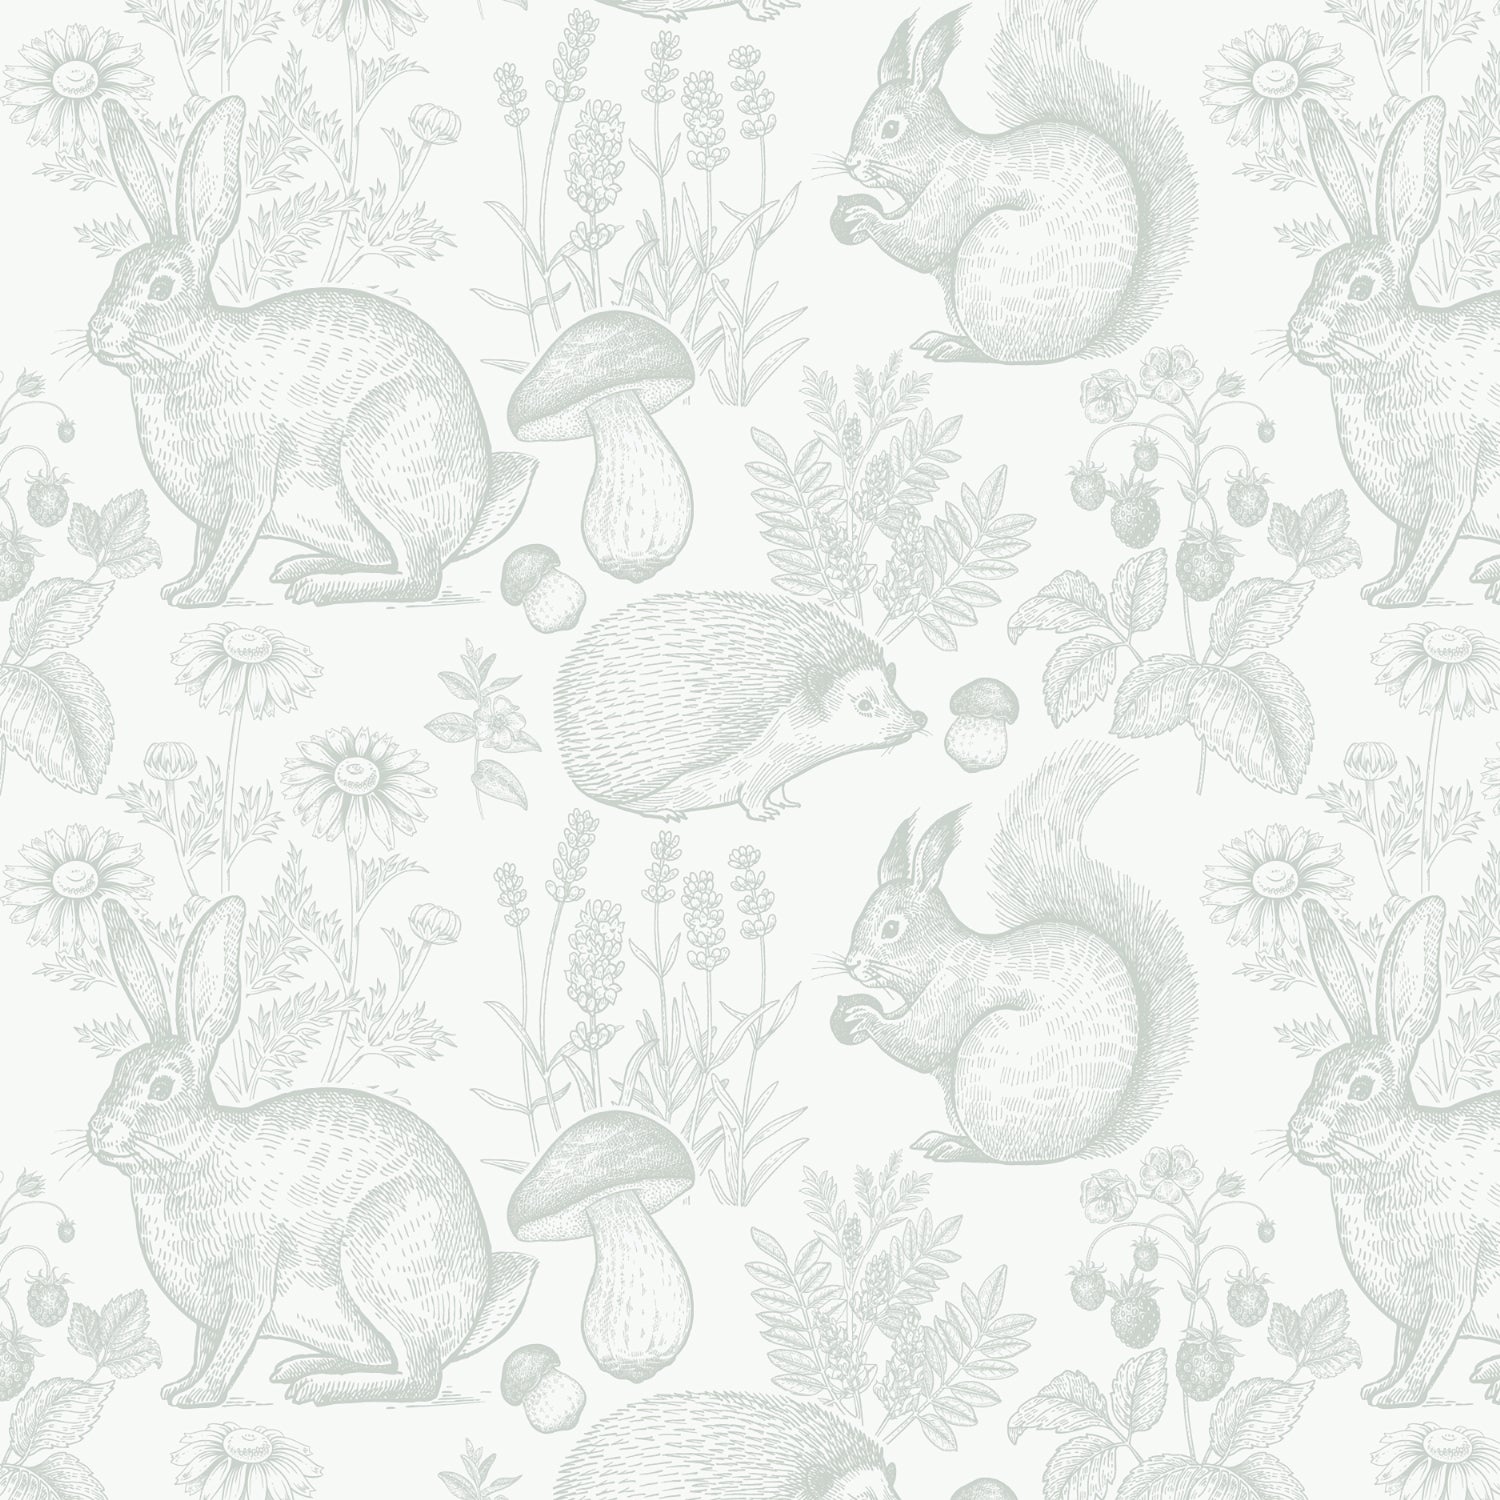 A close-up view of the Woodland Creatures Wallpaper - Light Sage, showcasing the detailed pencil-style illustrations of forest animals among a variety of plants and flowers. The light sage hue offers a soft, soothing backdrop that would charm any room